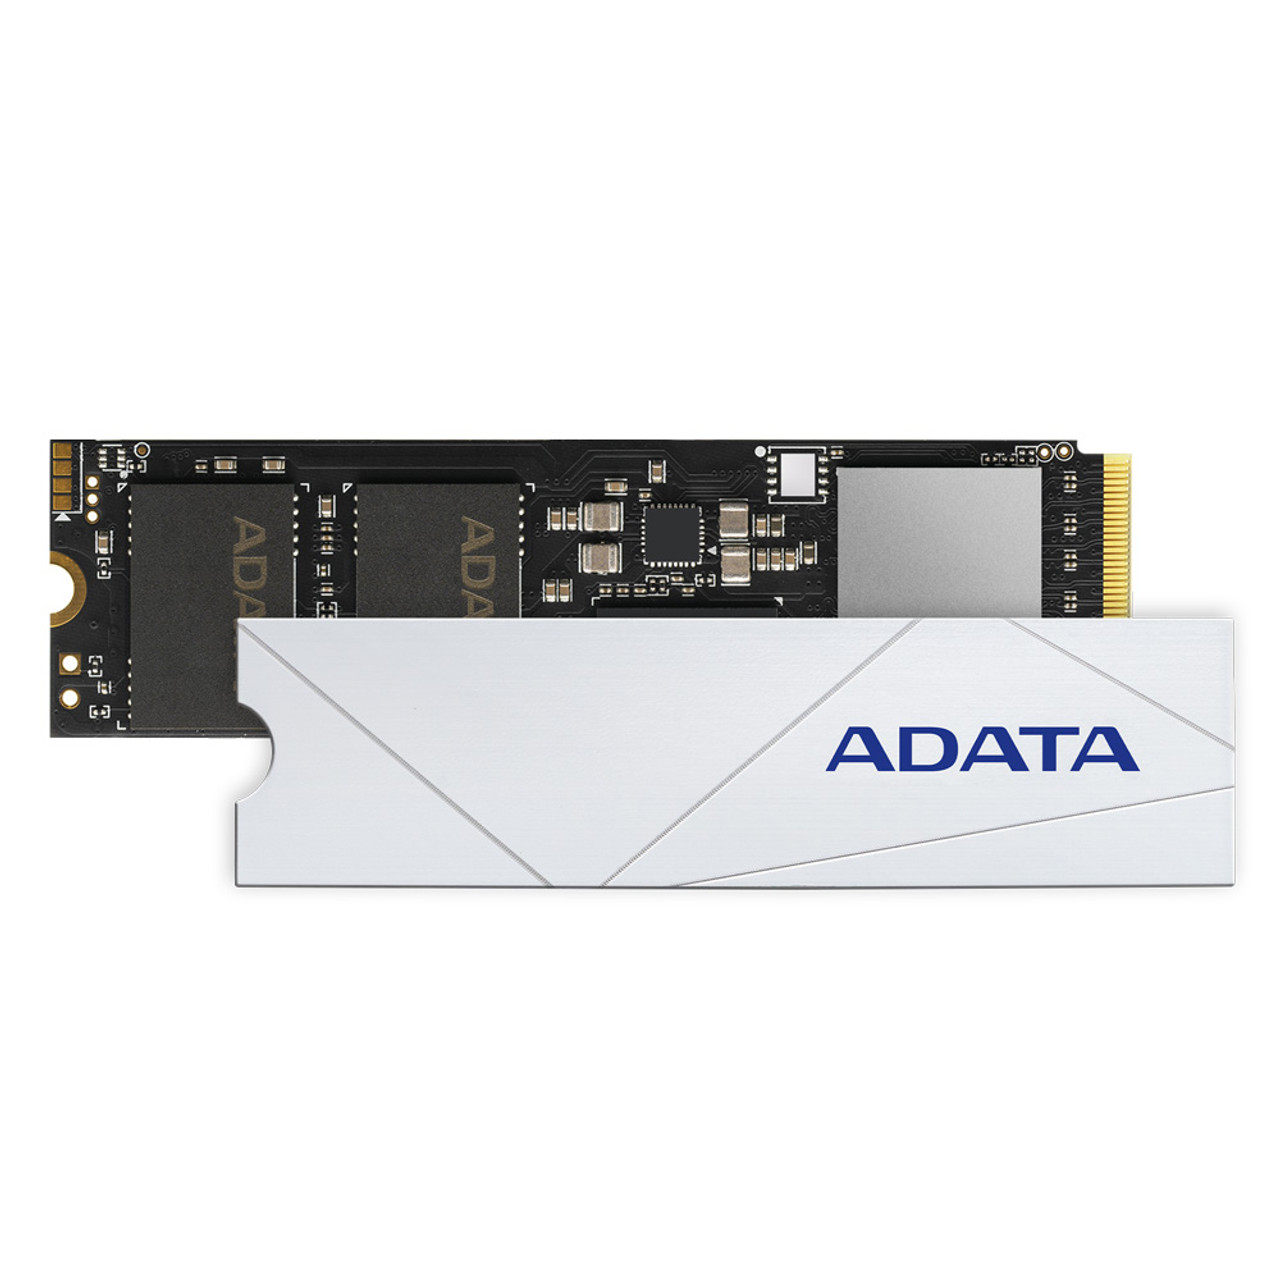 ADATA PREMIUM SSD FOR PS5 1TB PCIe Gen4 x4 M.2 2280 Internal Solid State Drive | White SSD | Ideal for Gaming | PS5 Compatible - Innogrit IG5236 | Up 7400MBps - 1PK - ADATA